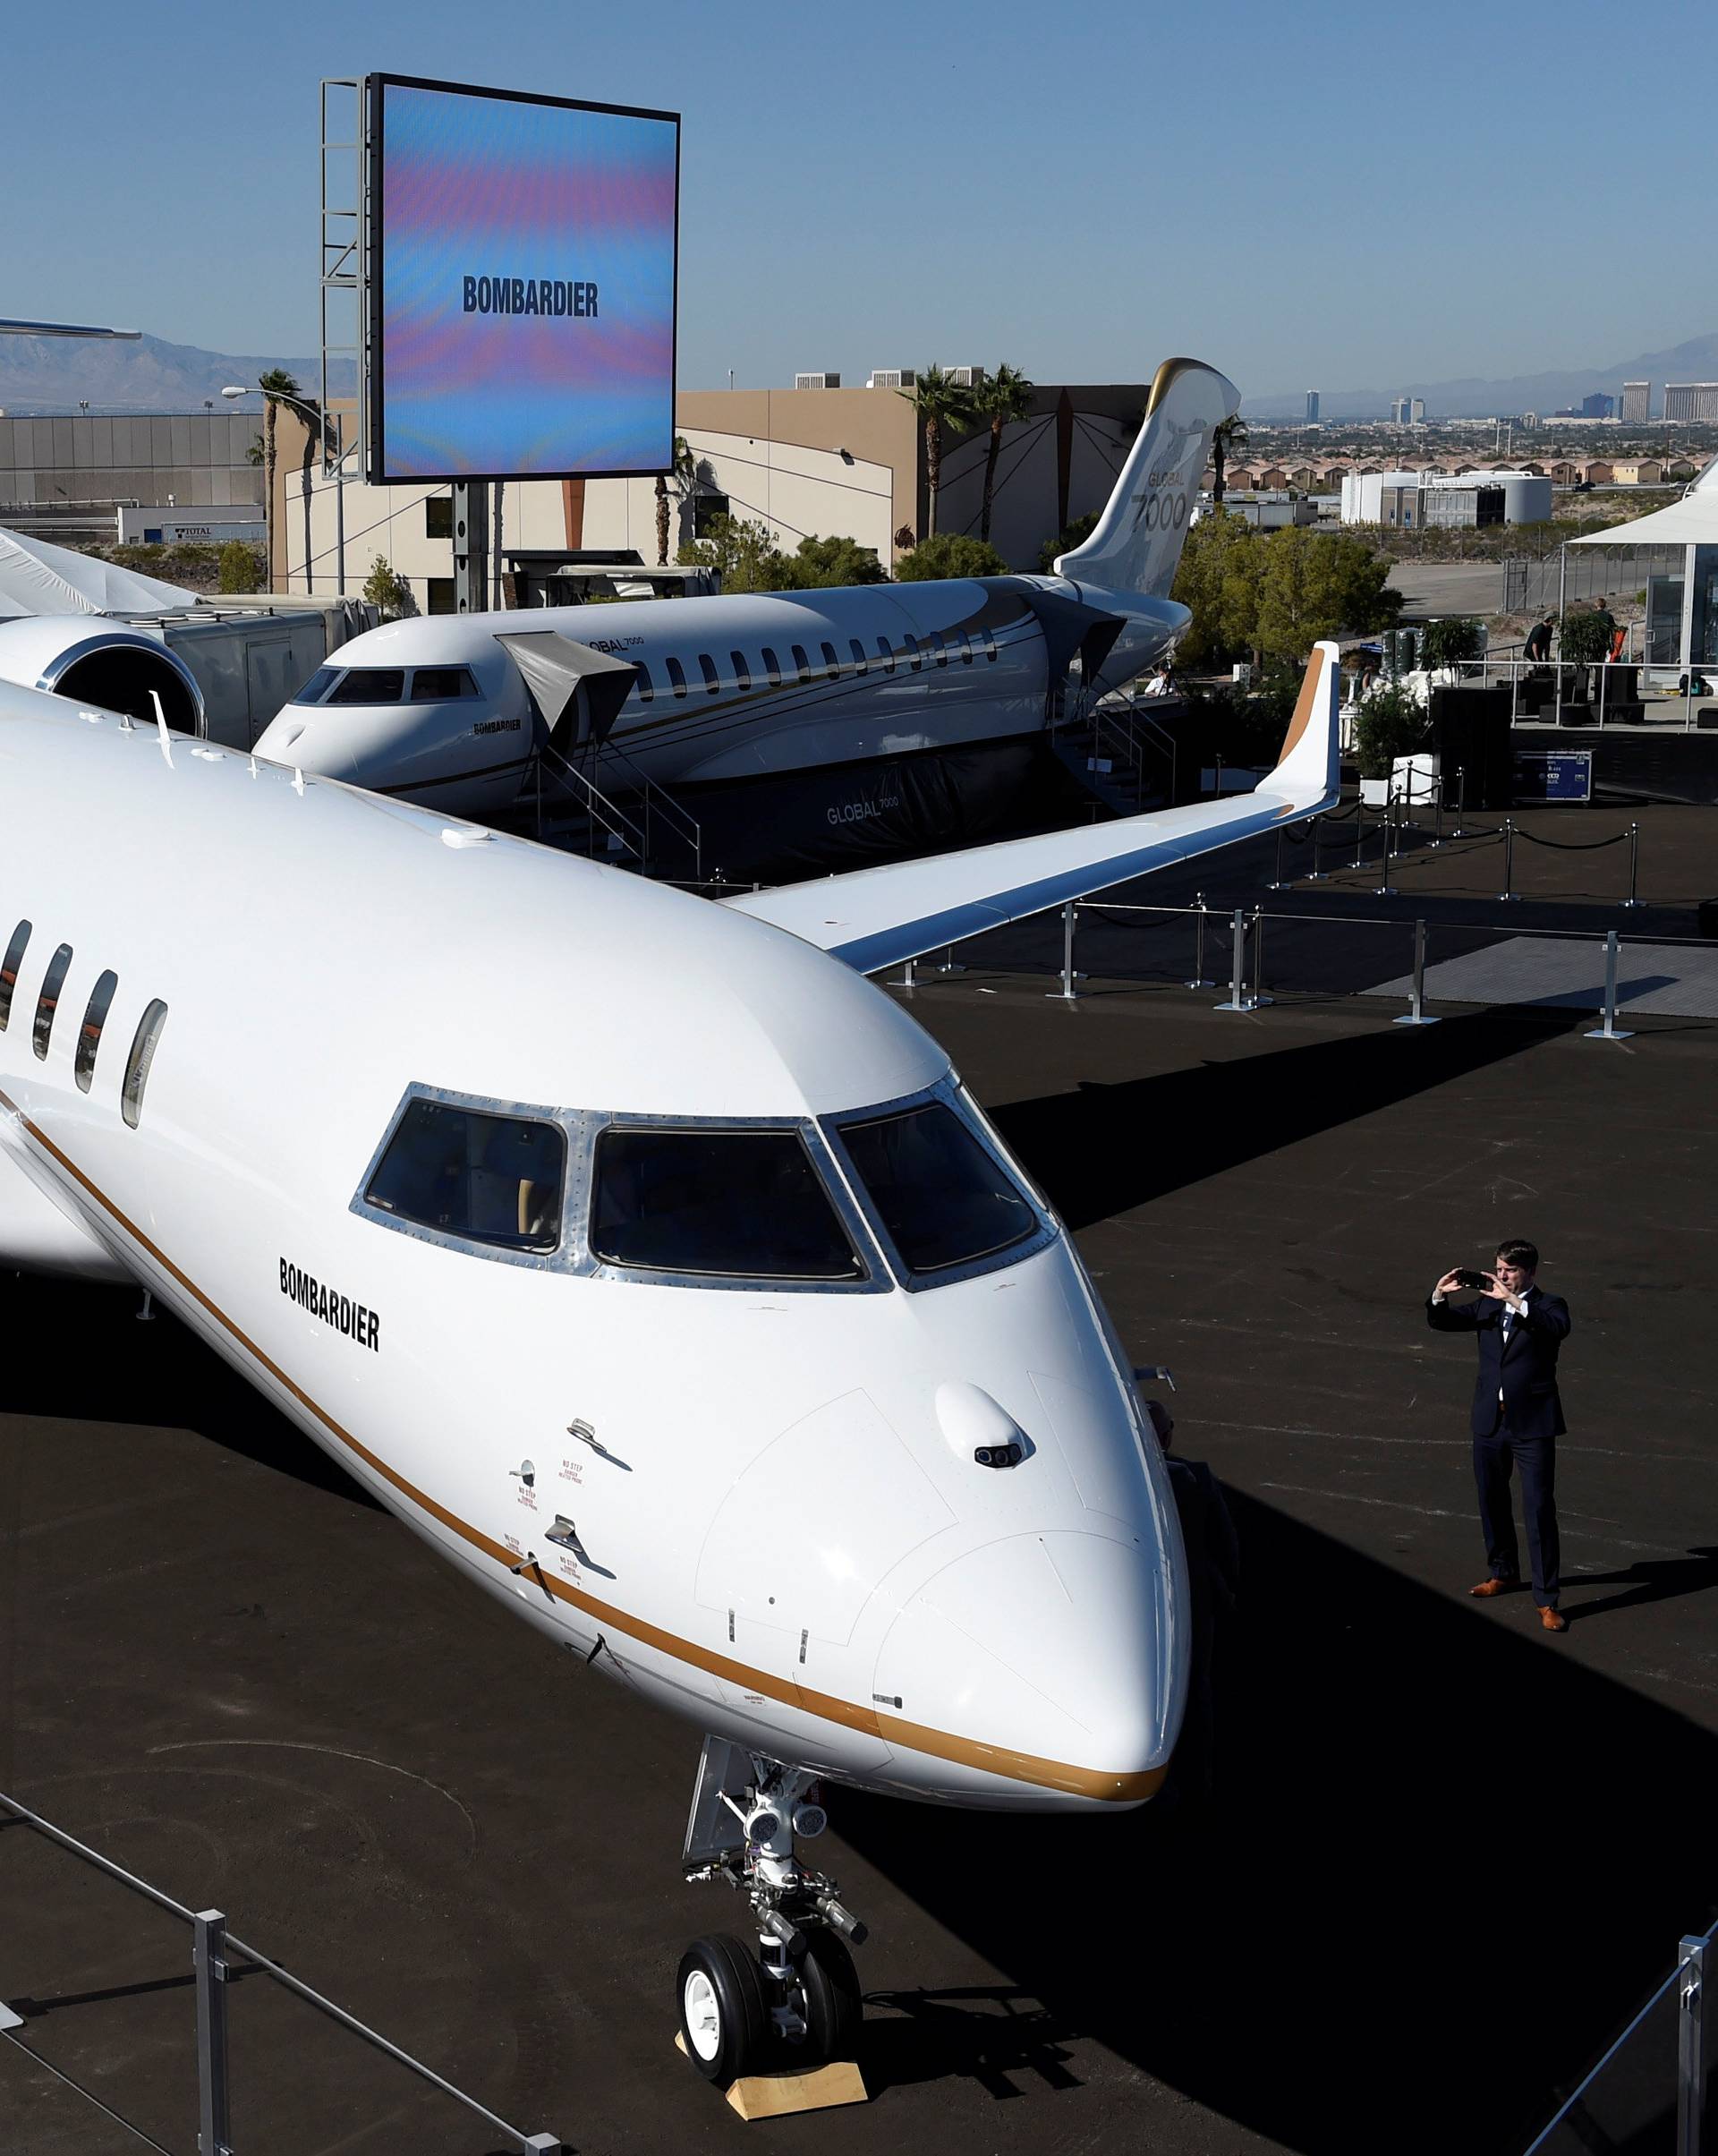 Bombardier's new Global 7000 business jet is seen during the National Business Aviation Association at the Henderson Executive Airport in Henderson